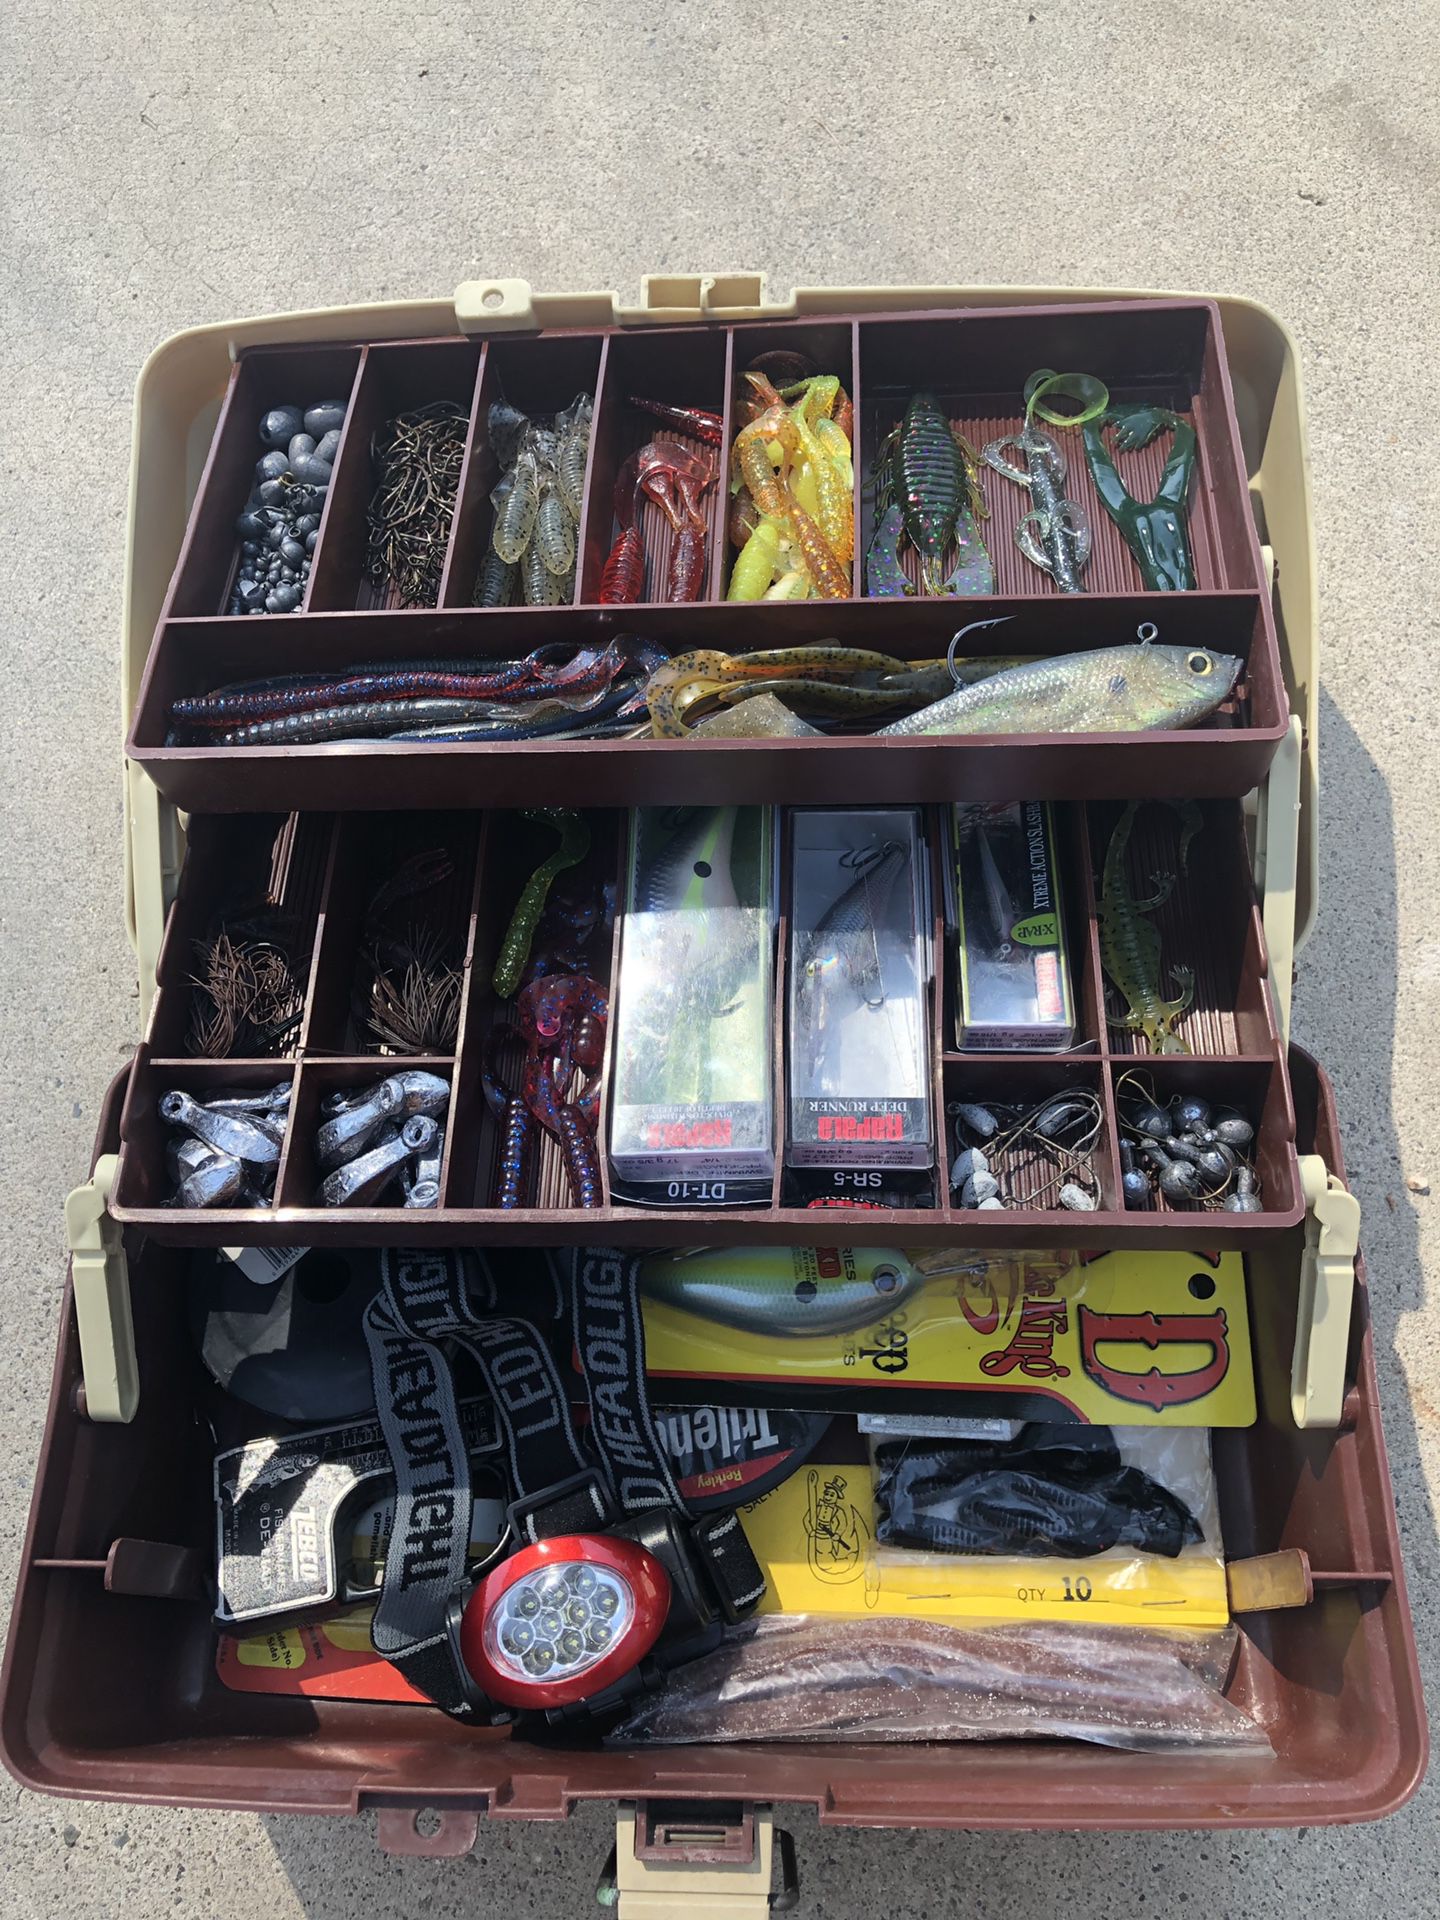 Fishing tackle box with gear